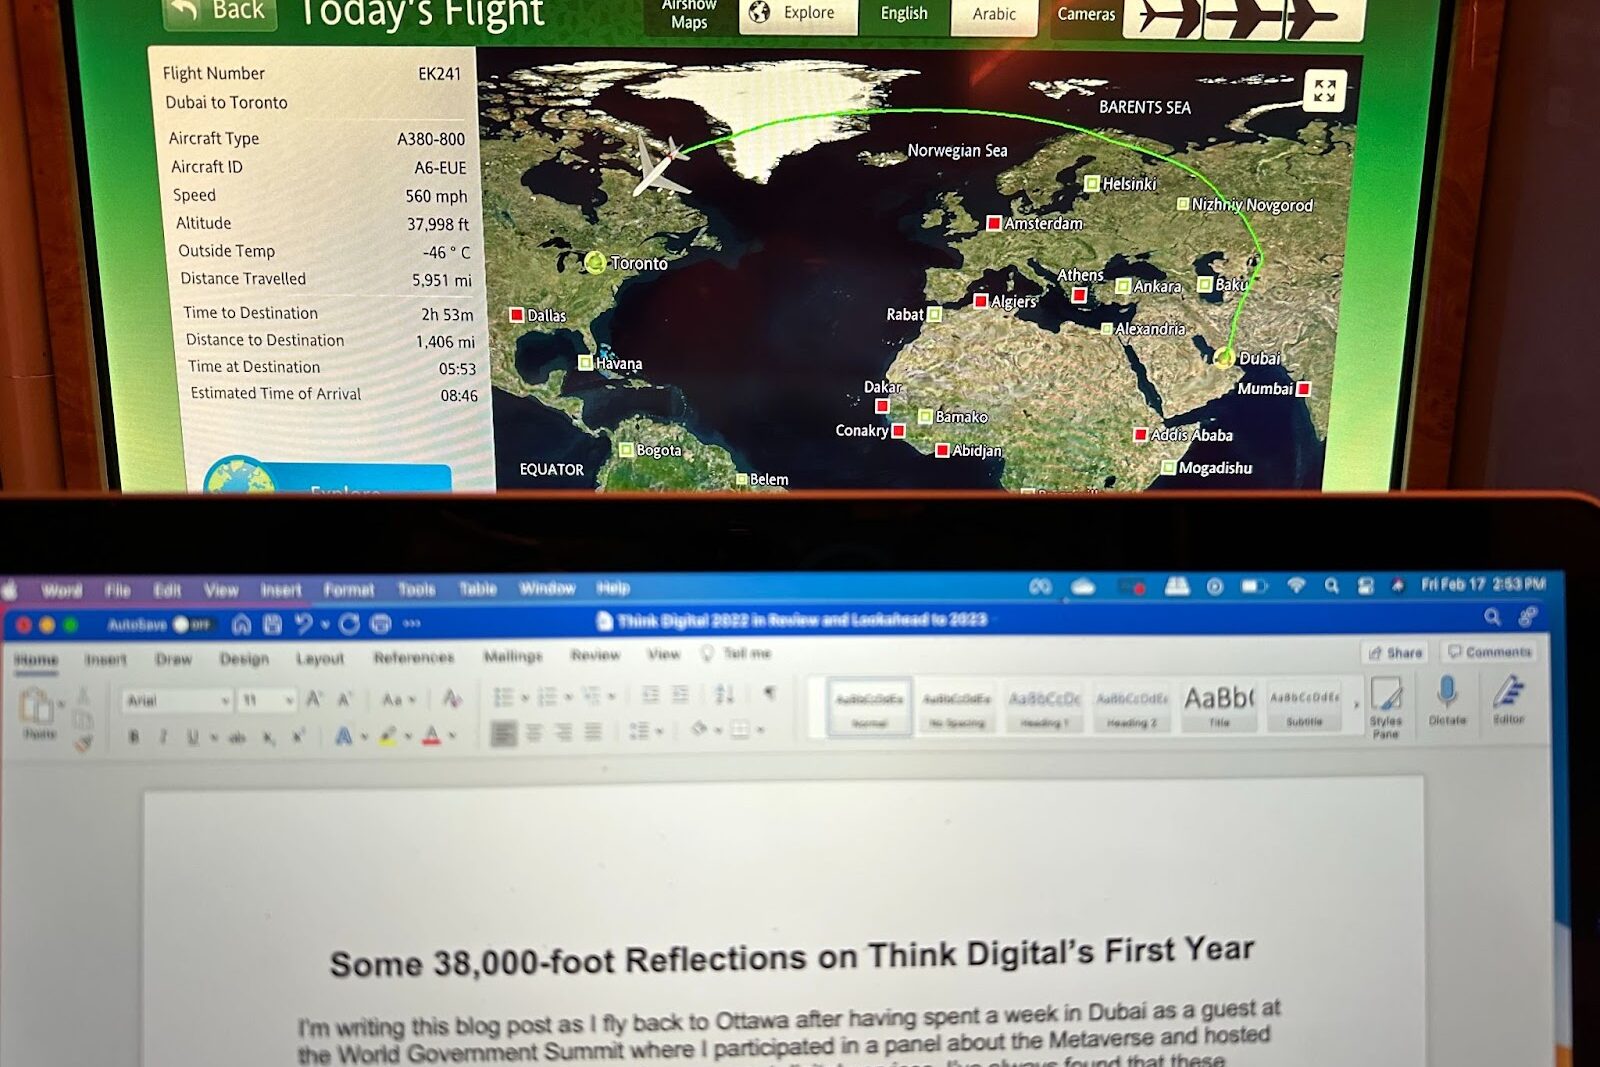 Airplane map in the background showing trip from Dubai to Toronto. In foreground laptop screen with word document open with the title of this blog post: Some 38,000-foot Reflections on Think Digital's First Year